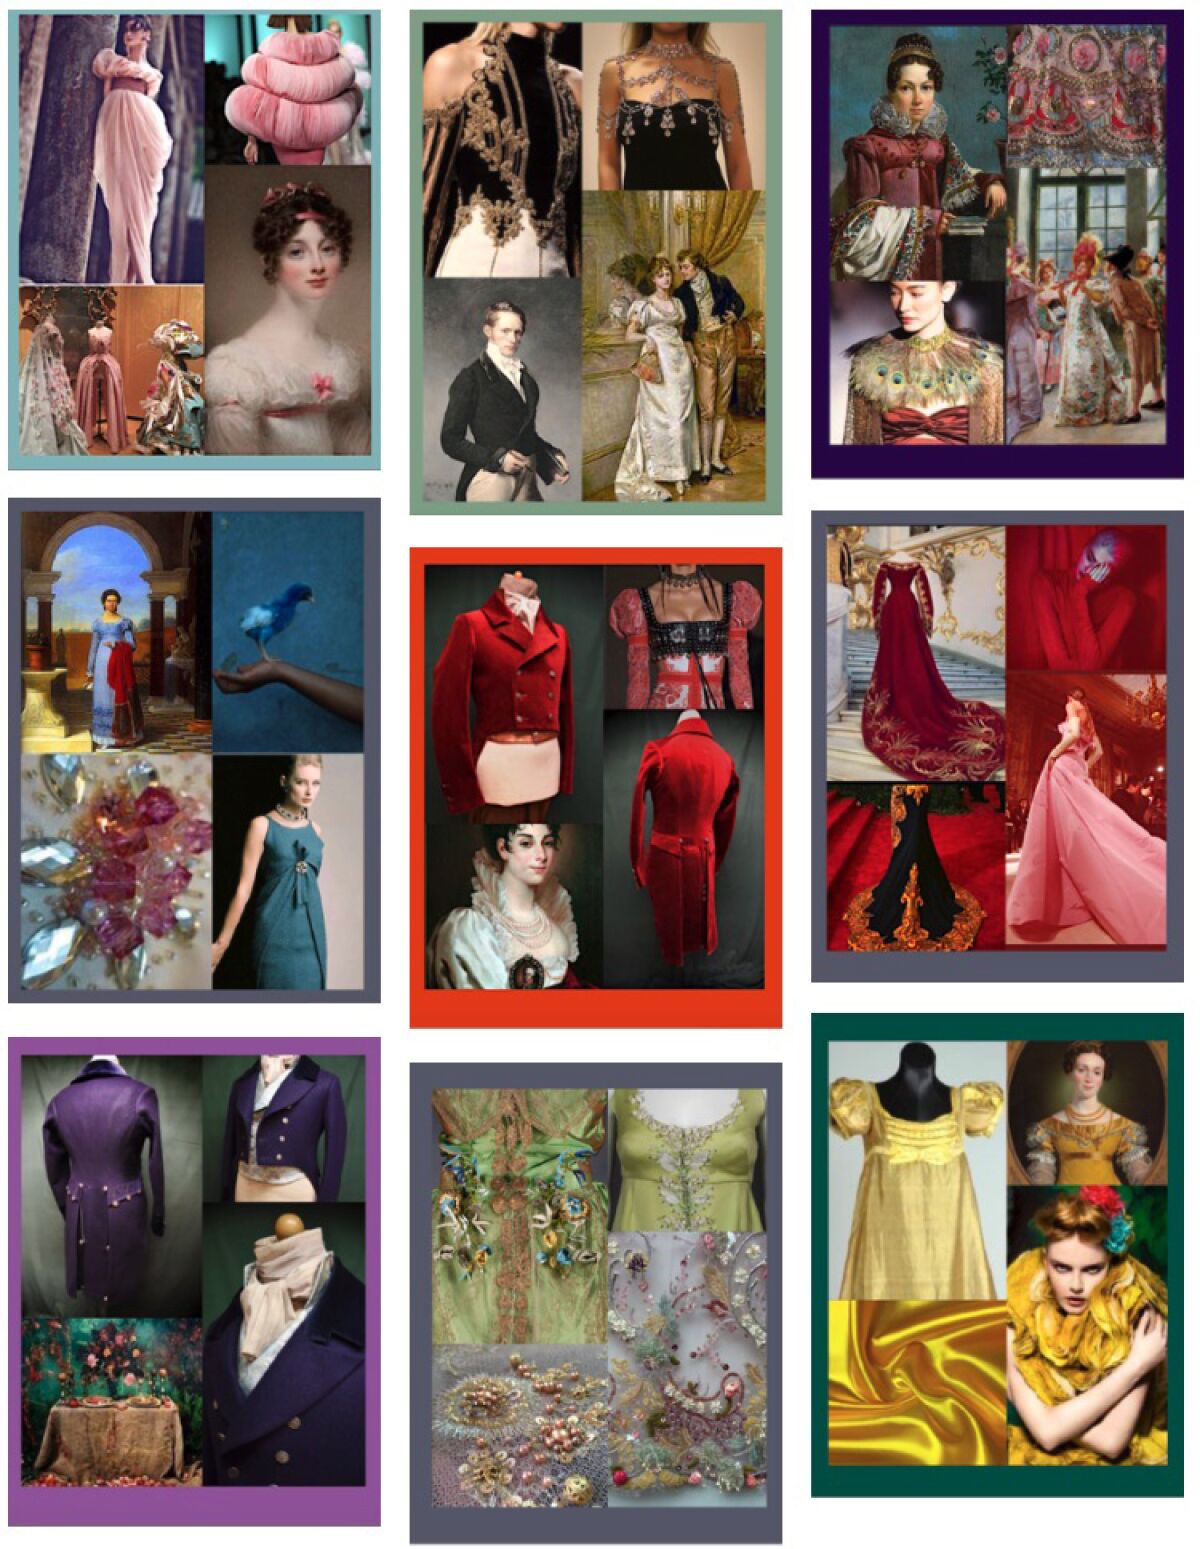 Color-coded pages from the "Bridgerton" costume lookbook